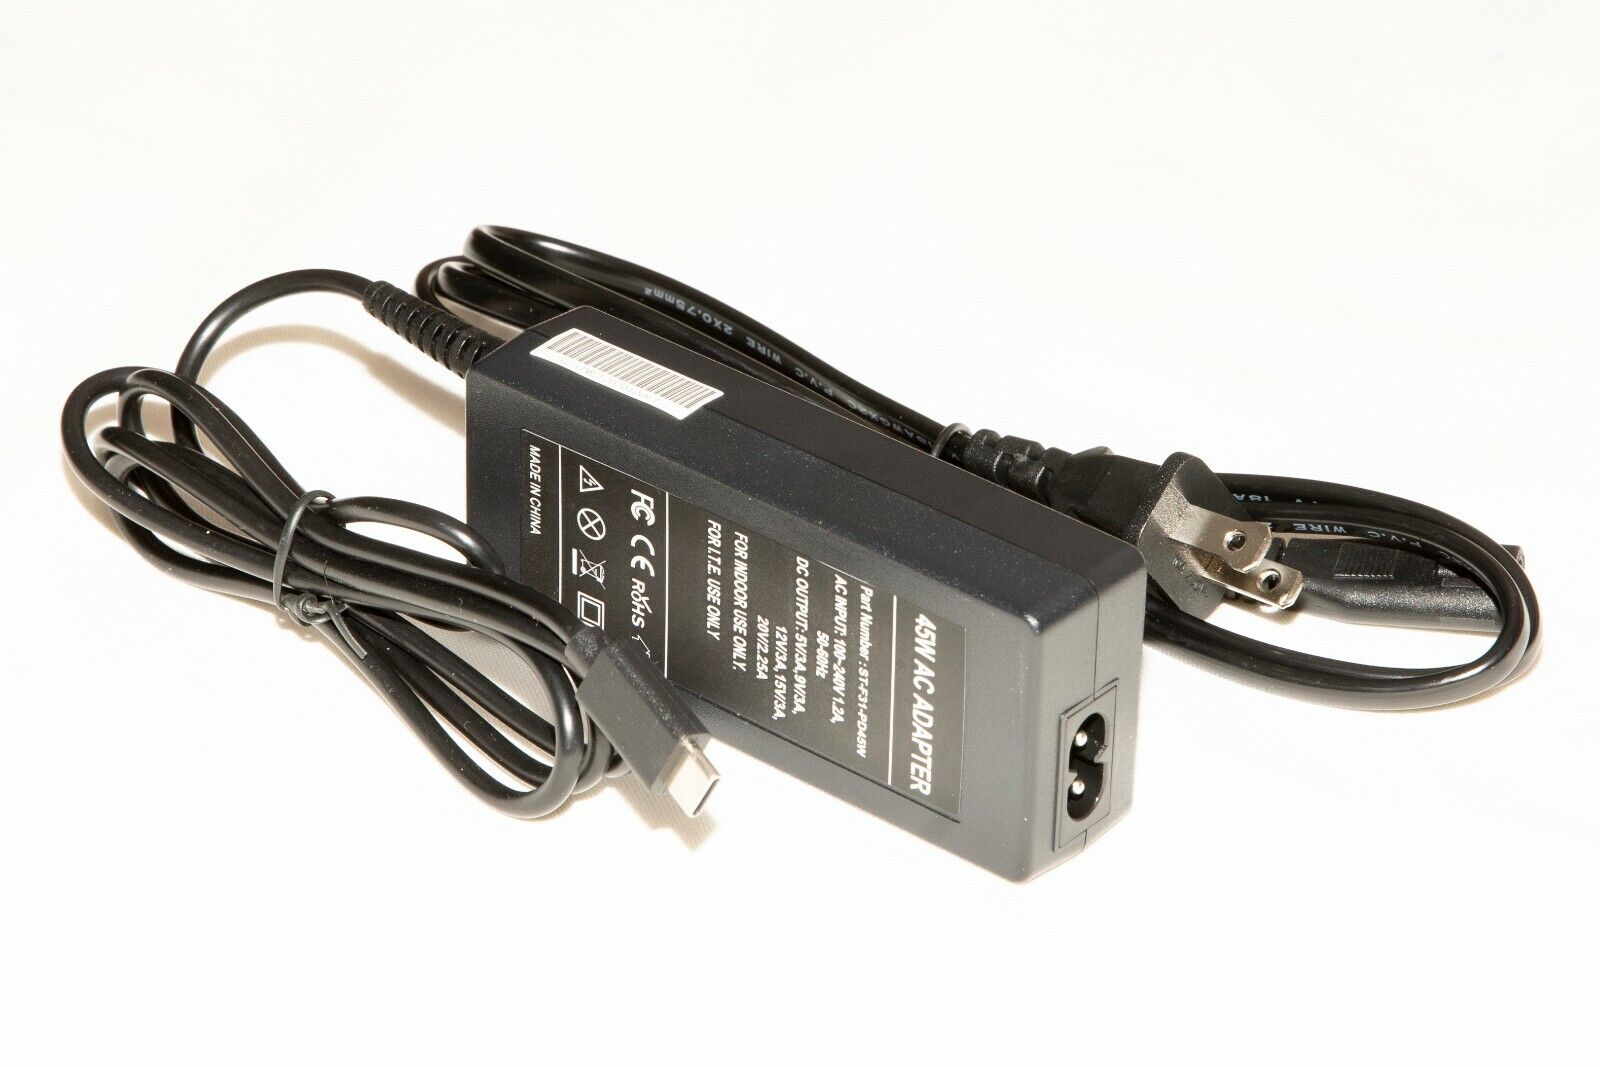 AC Power Adapter USB-C Charger Cord 45W For HP 844205-850 934739-850 920068-850